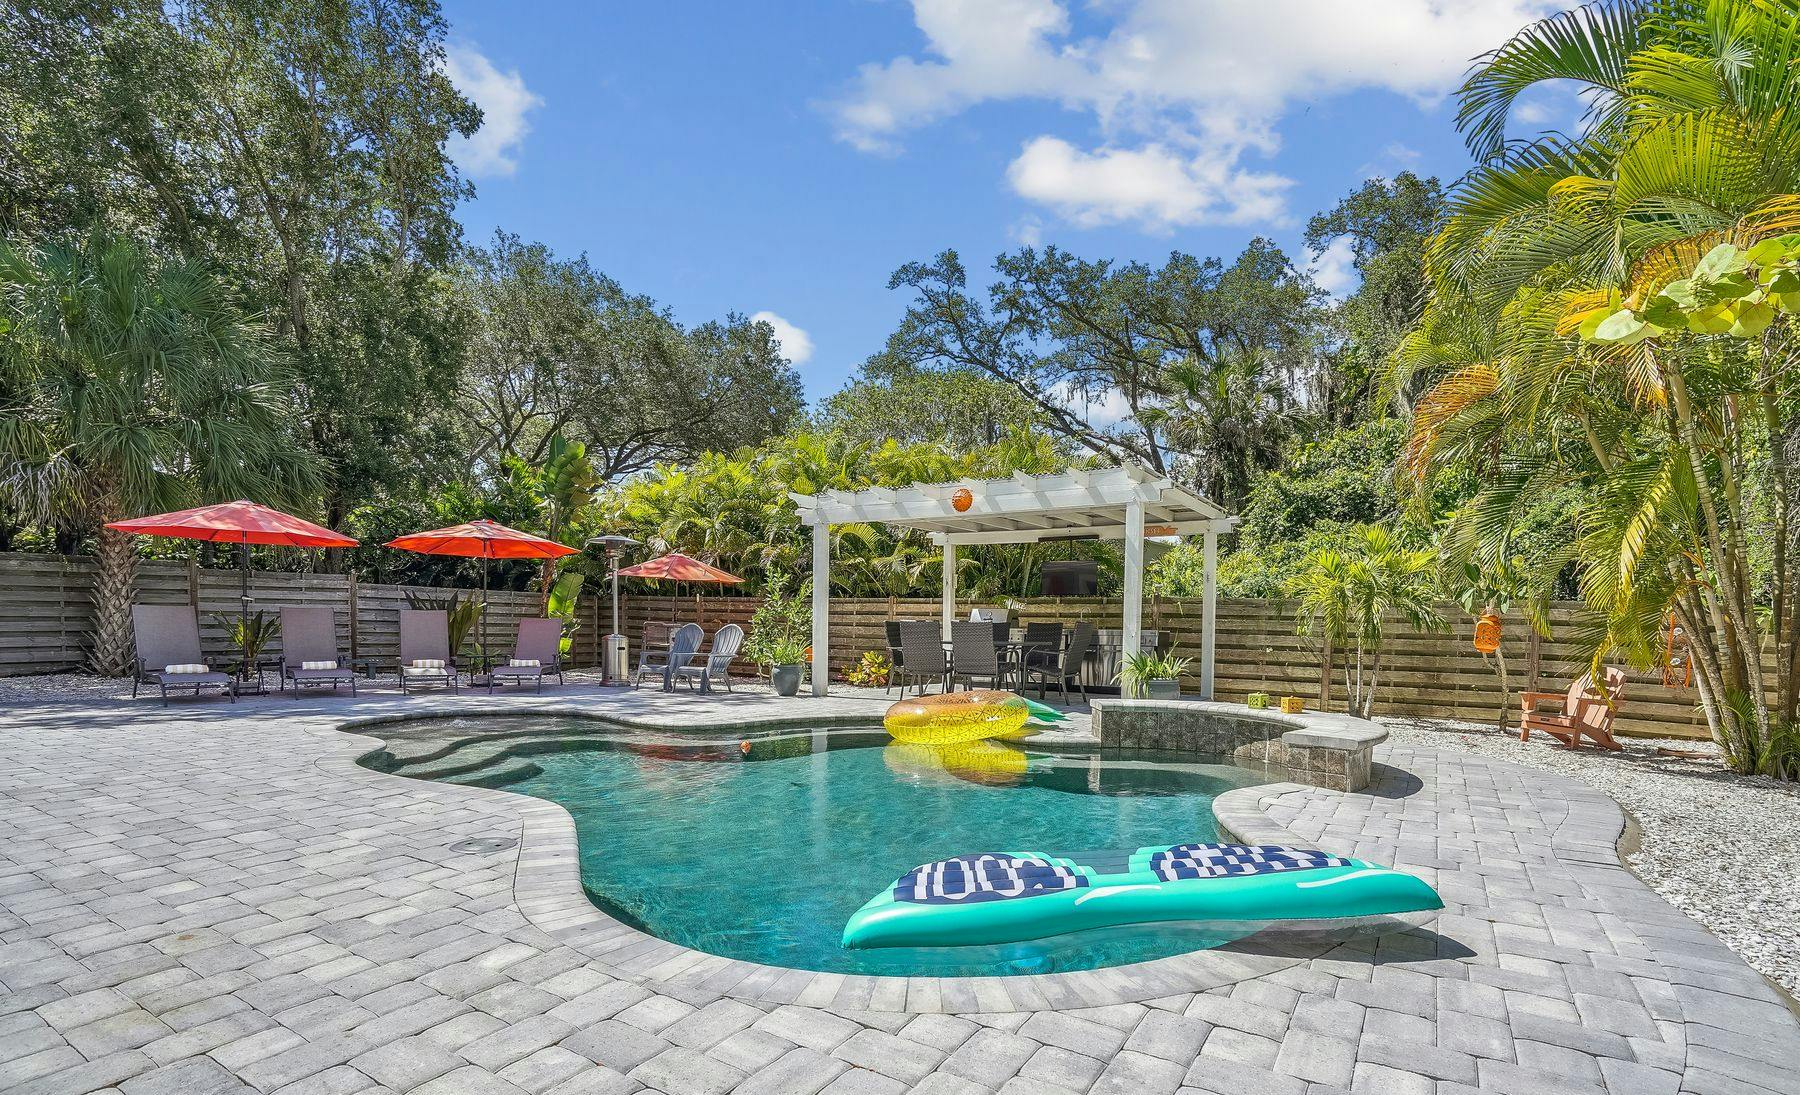 Outdoor living space with a private pool at an Anna Maria Island vacation rental.